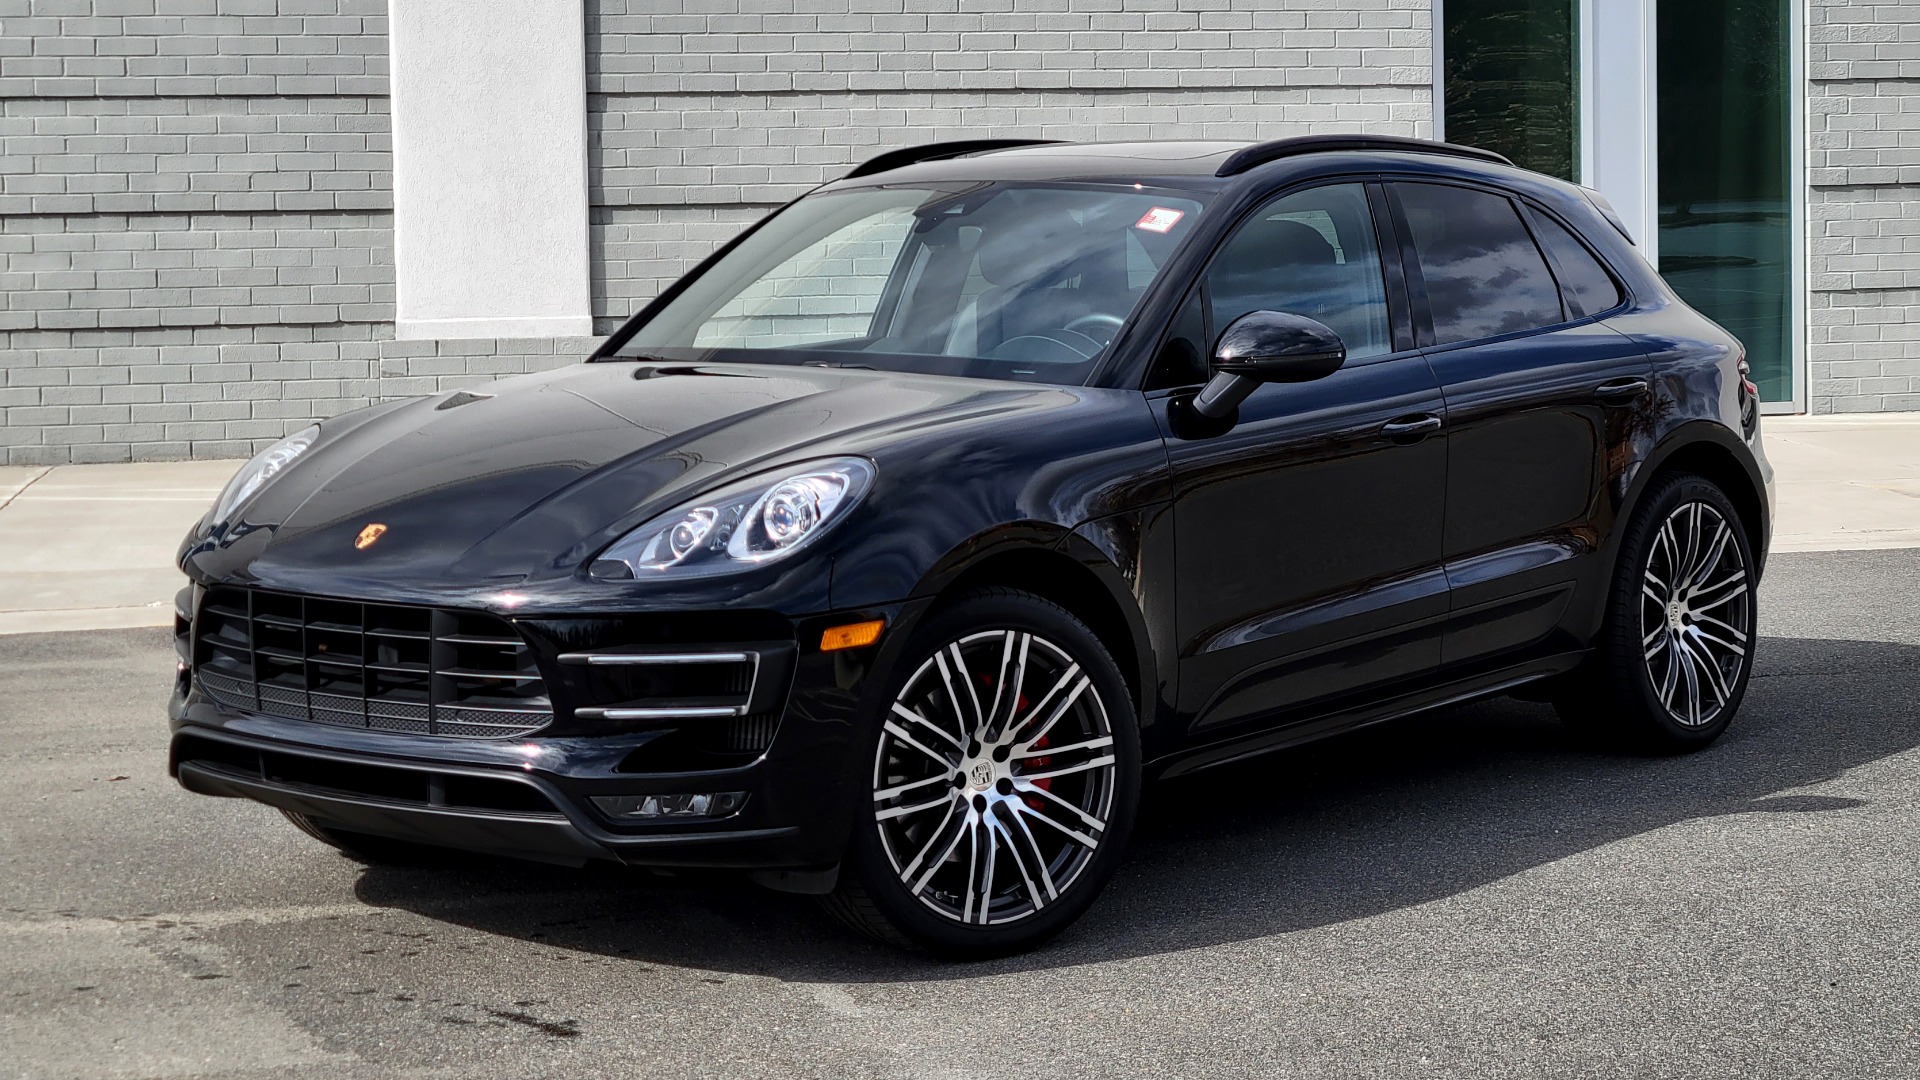 Used 2016 Porsche MACAN TURBO 3.6L PREMIUM / NAV / BOSE / SUNROOF / REARVIEW for sale Sold at Formula Imports in Charlotte NC 28227 4